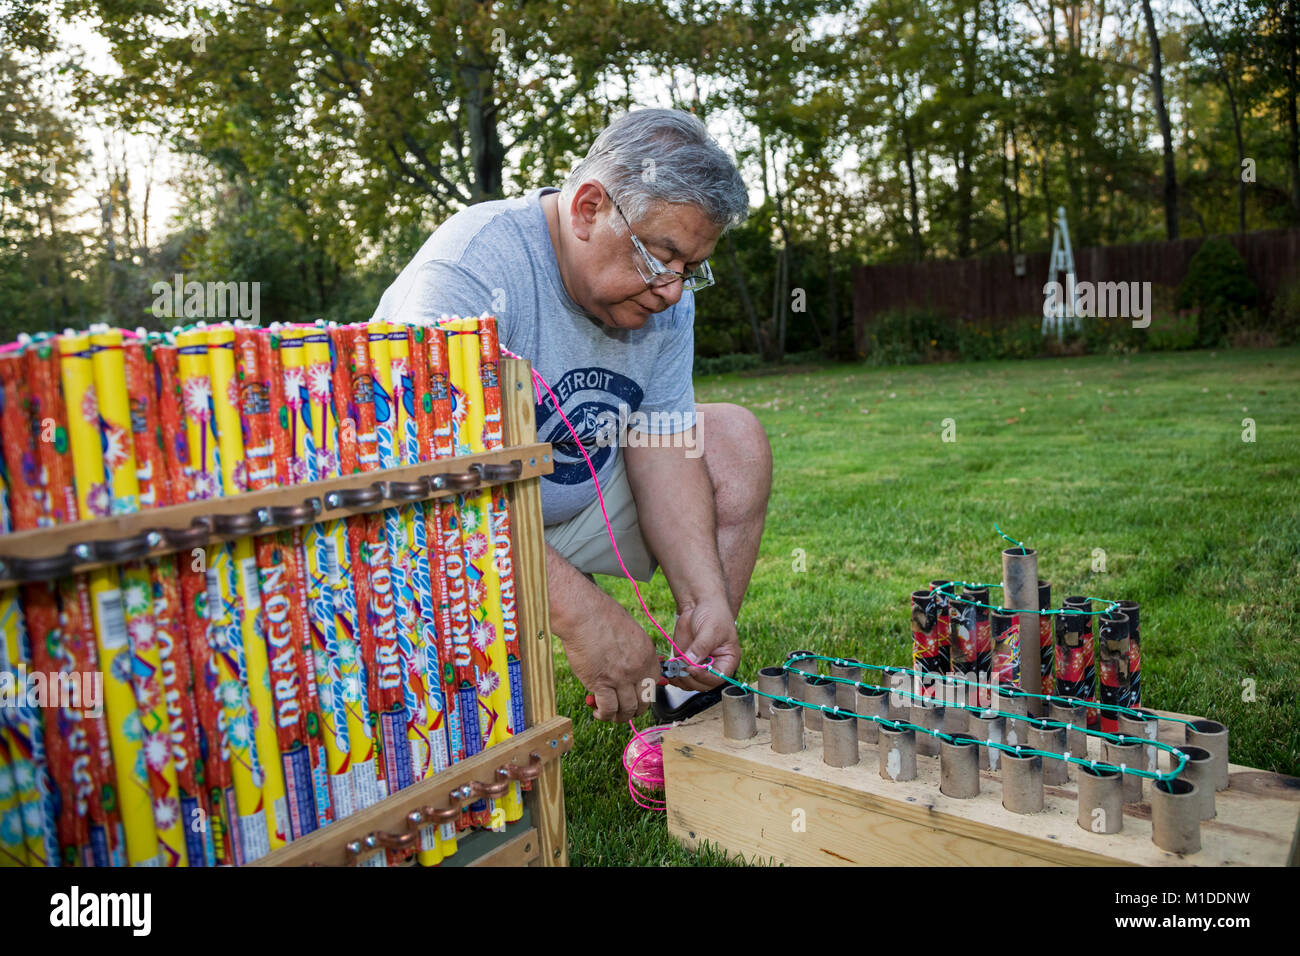 Port Huron Township, Michigan - Lorenzo Almendarez, Sr. connects the fuses for a fireworks show at his home. Stock Photo